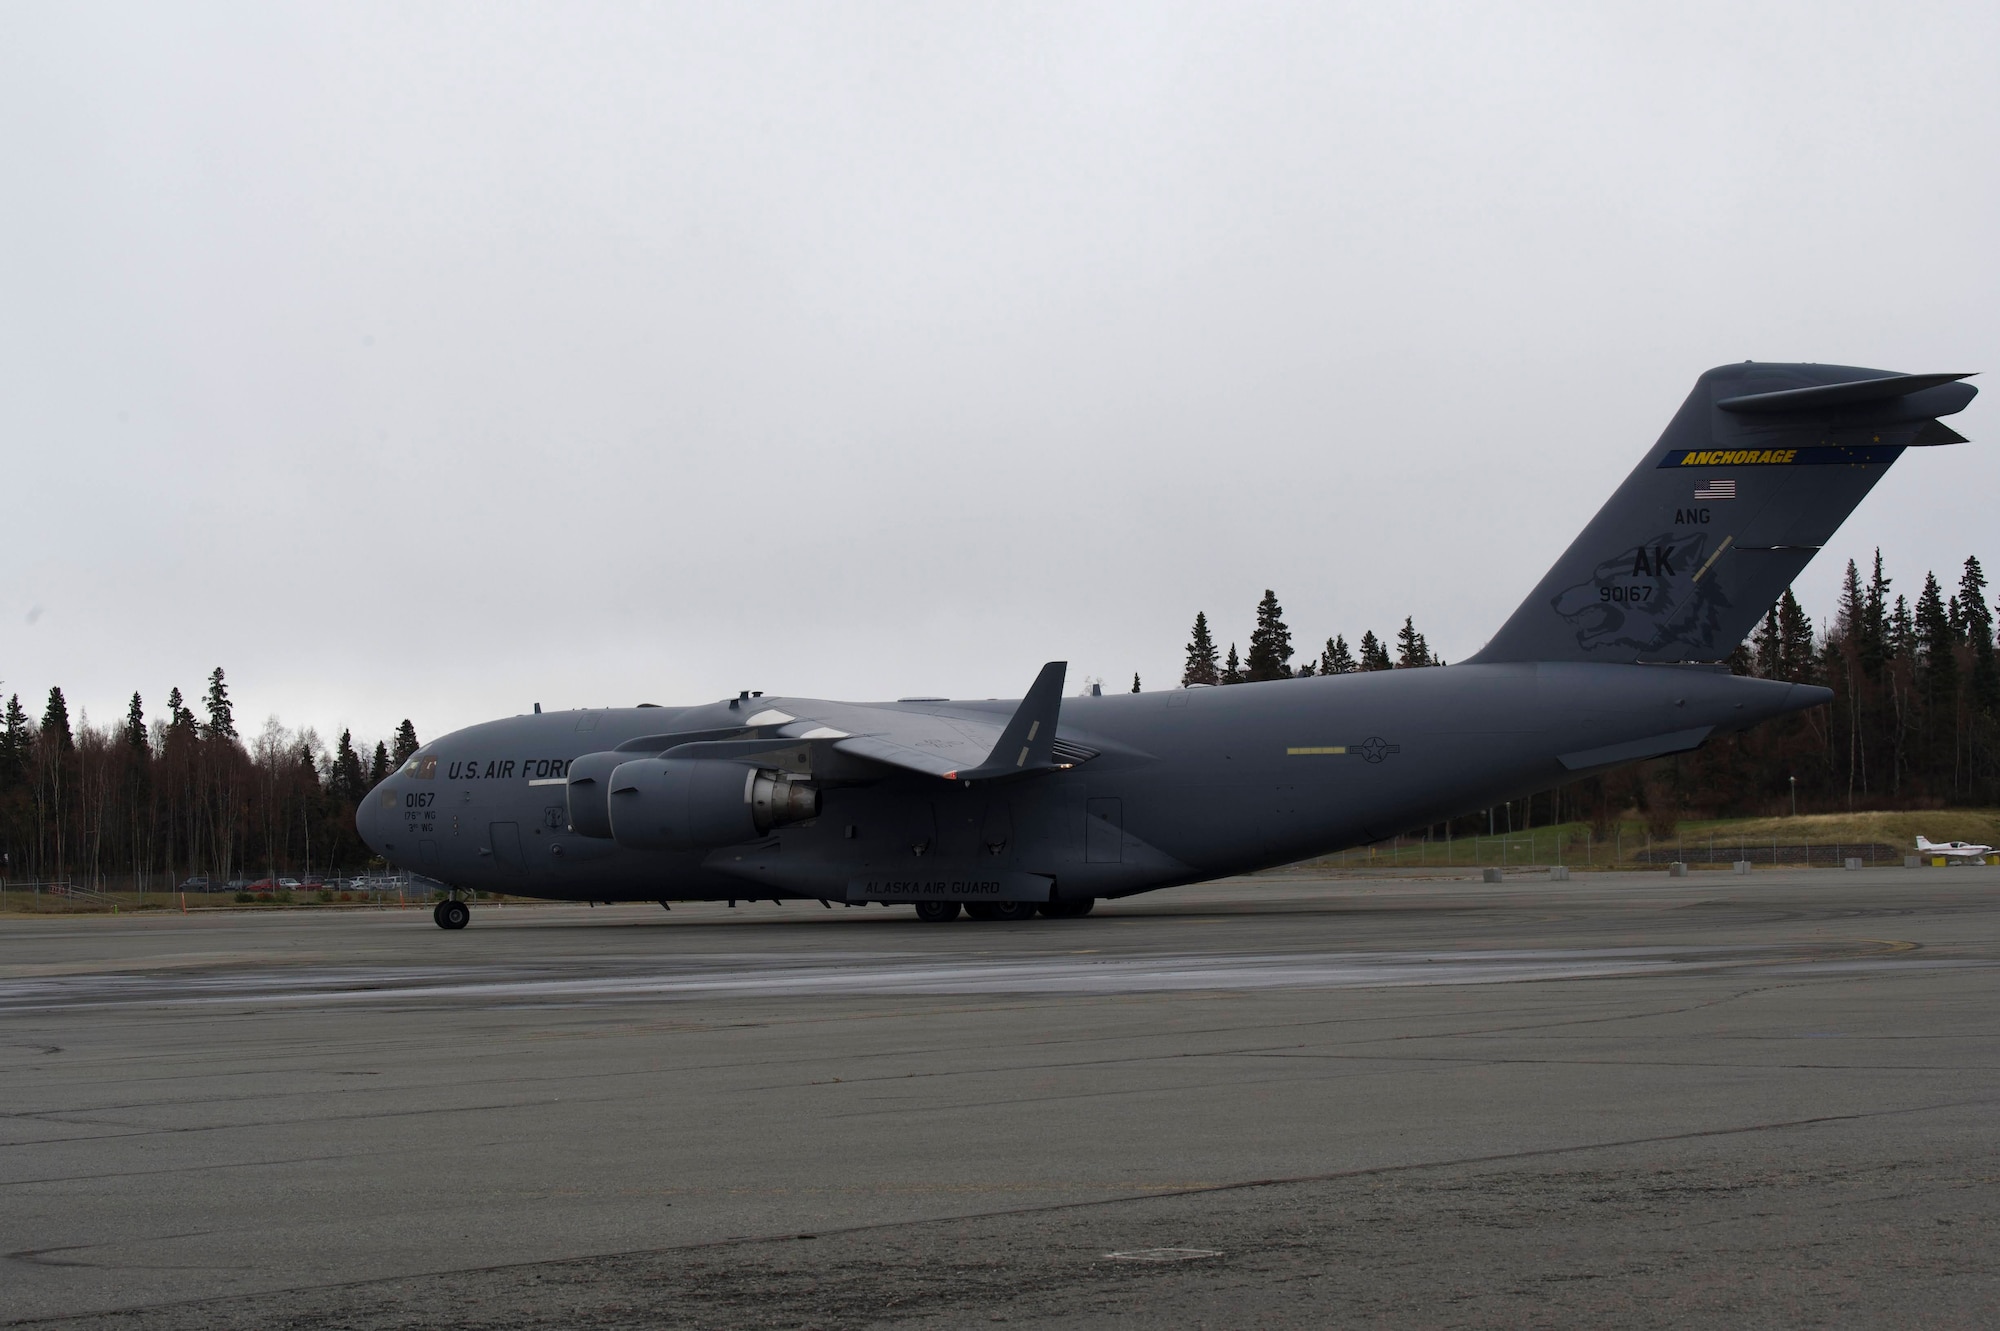 A C-17 Globemaster III assigned to the 176th Air National Guard prepares to depart at Ted Steven International Airport in Anchorage, Alaska as part of the Nodal Lightning exercise, Oct. 19, 2021. The Nodal Lightning exercise allowed the 732nd AMS personnel to respond efficiently and effectively to contested or degraded contingency environments.